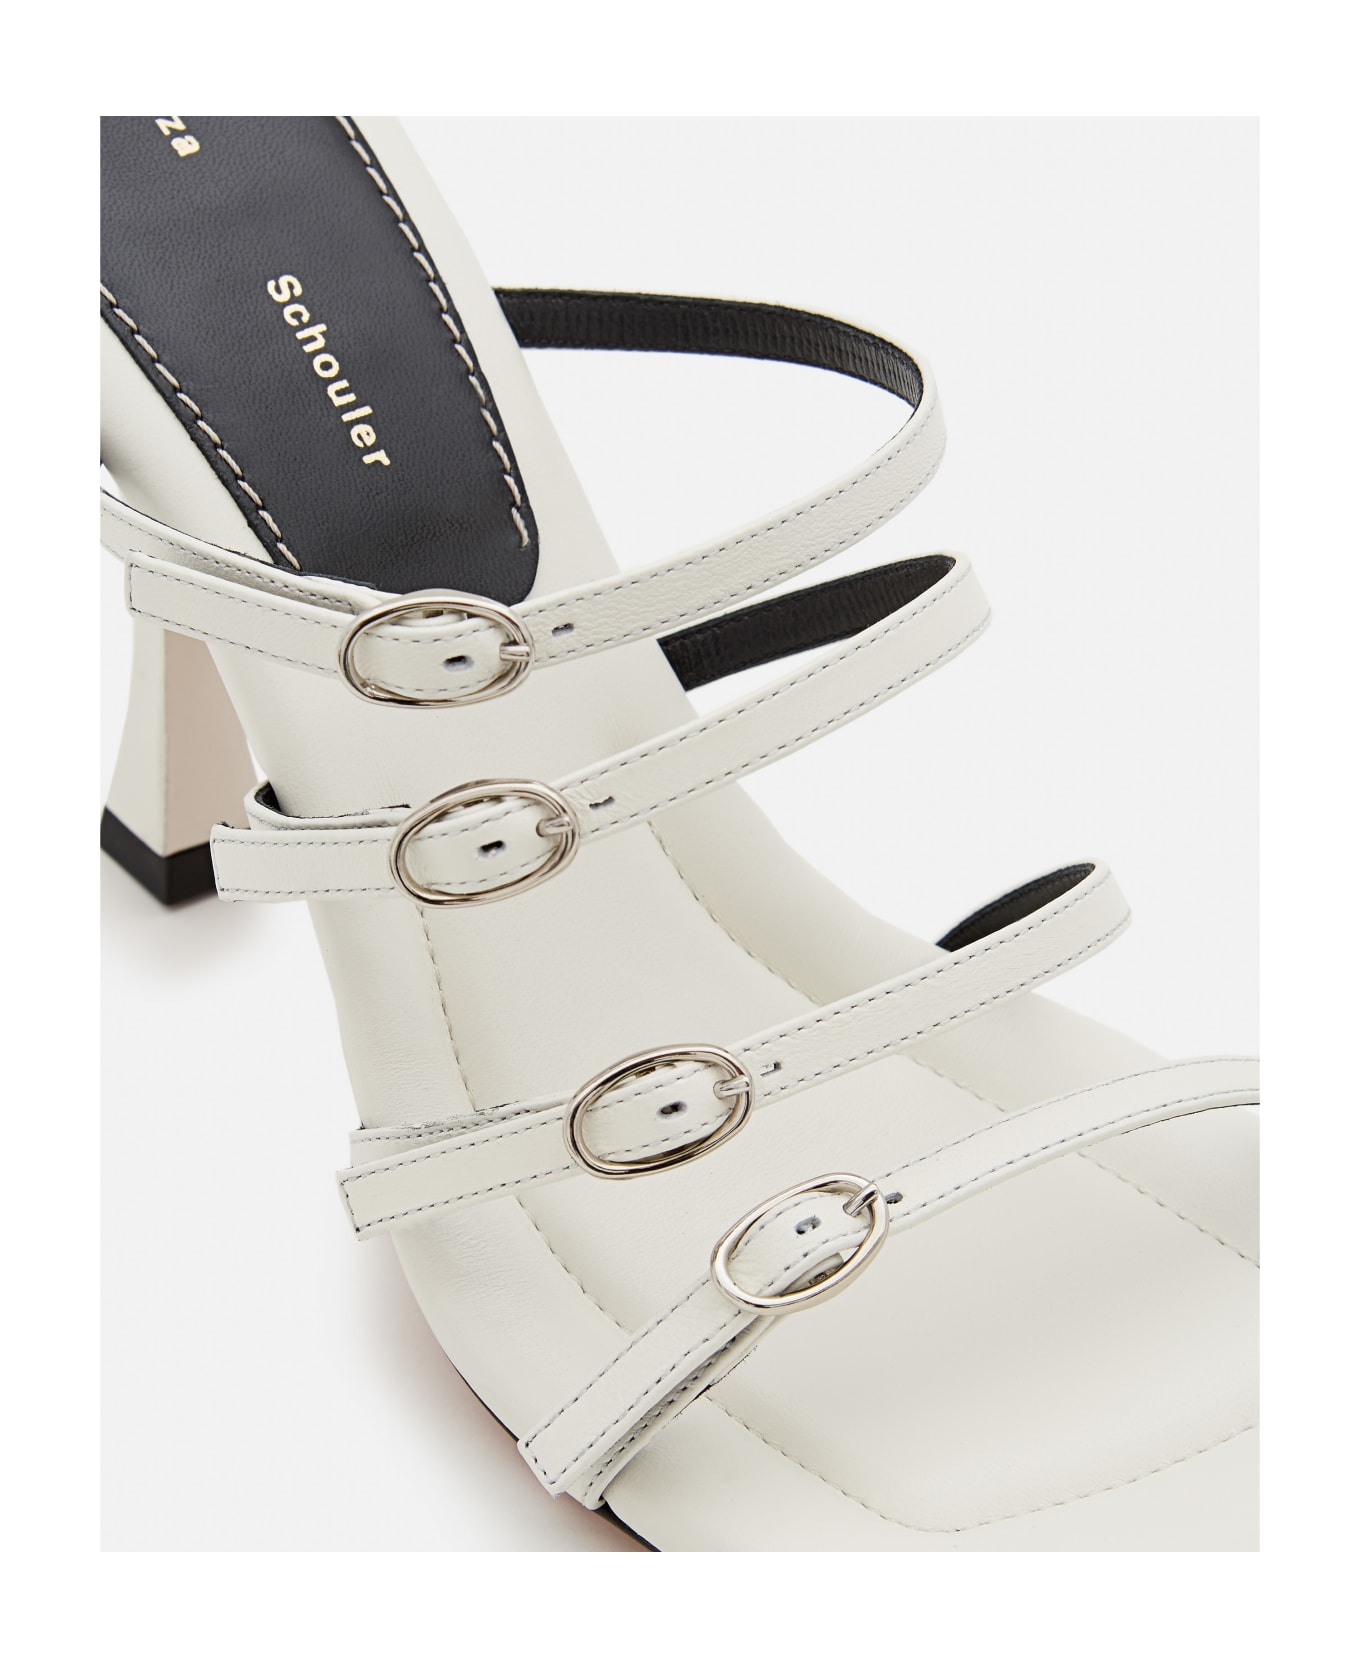 Proenza Schouler 95mm Leather Sandals - White